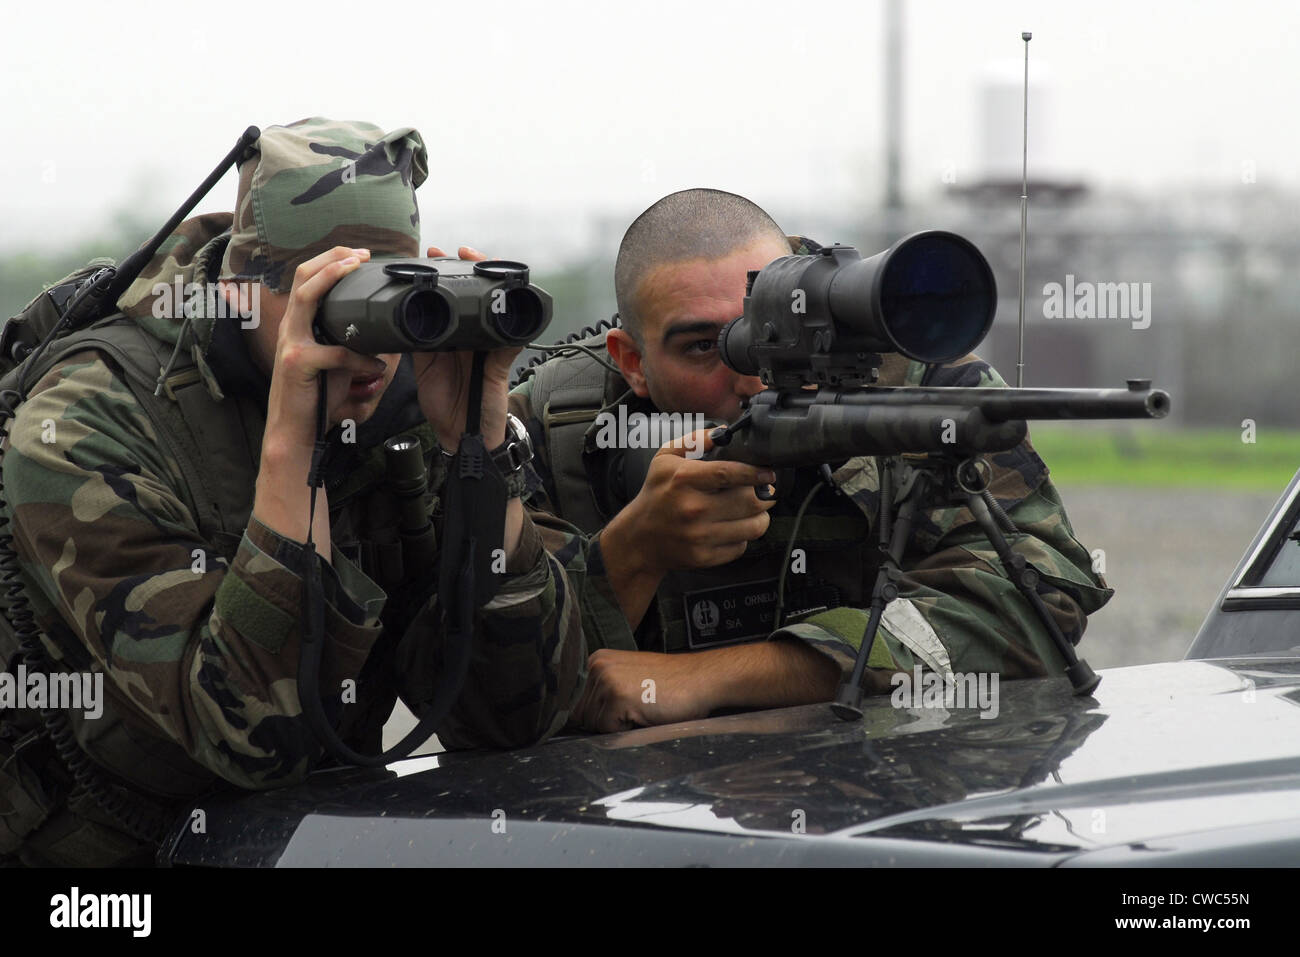 A sniper team search for opposing forces during an exercise at Osan Air Base South Korea July 23 2008. (BSLOC 2011 12 312) Stock Photo